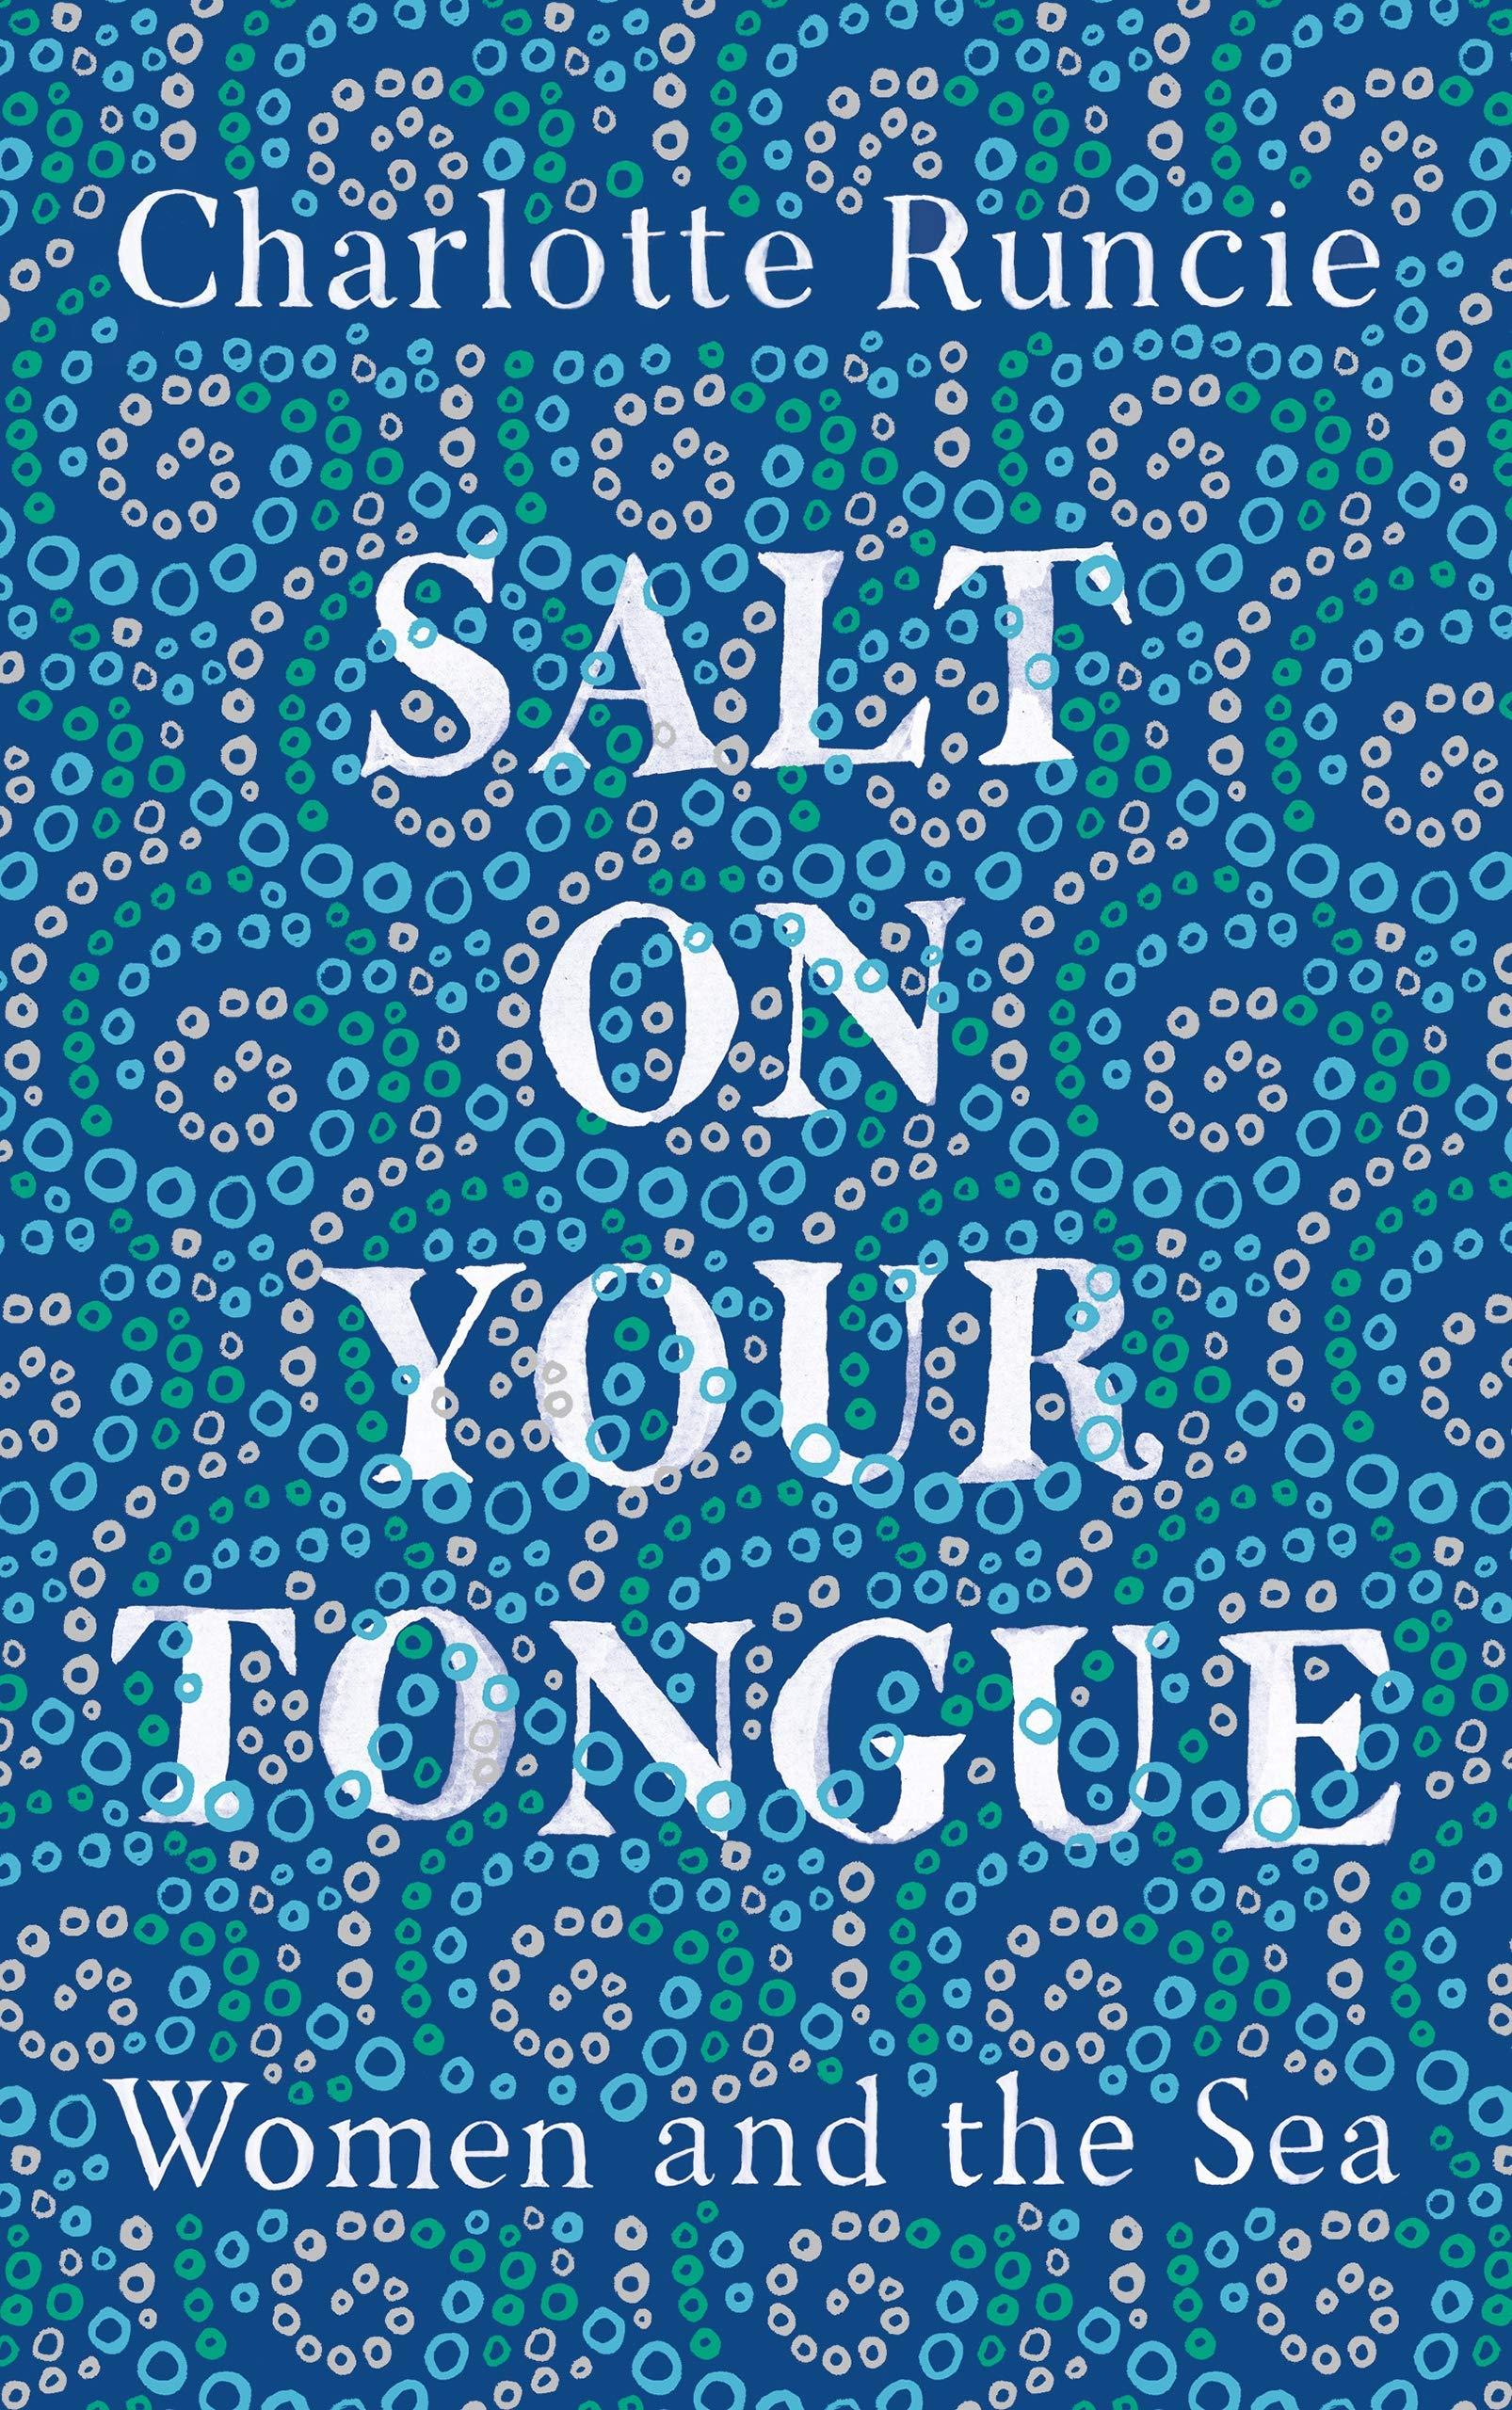 Salt on Your Tongue: Women and the Sea